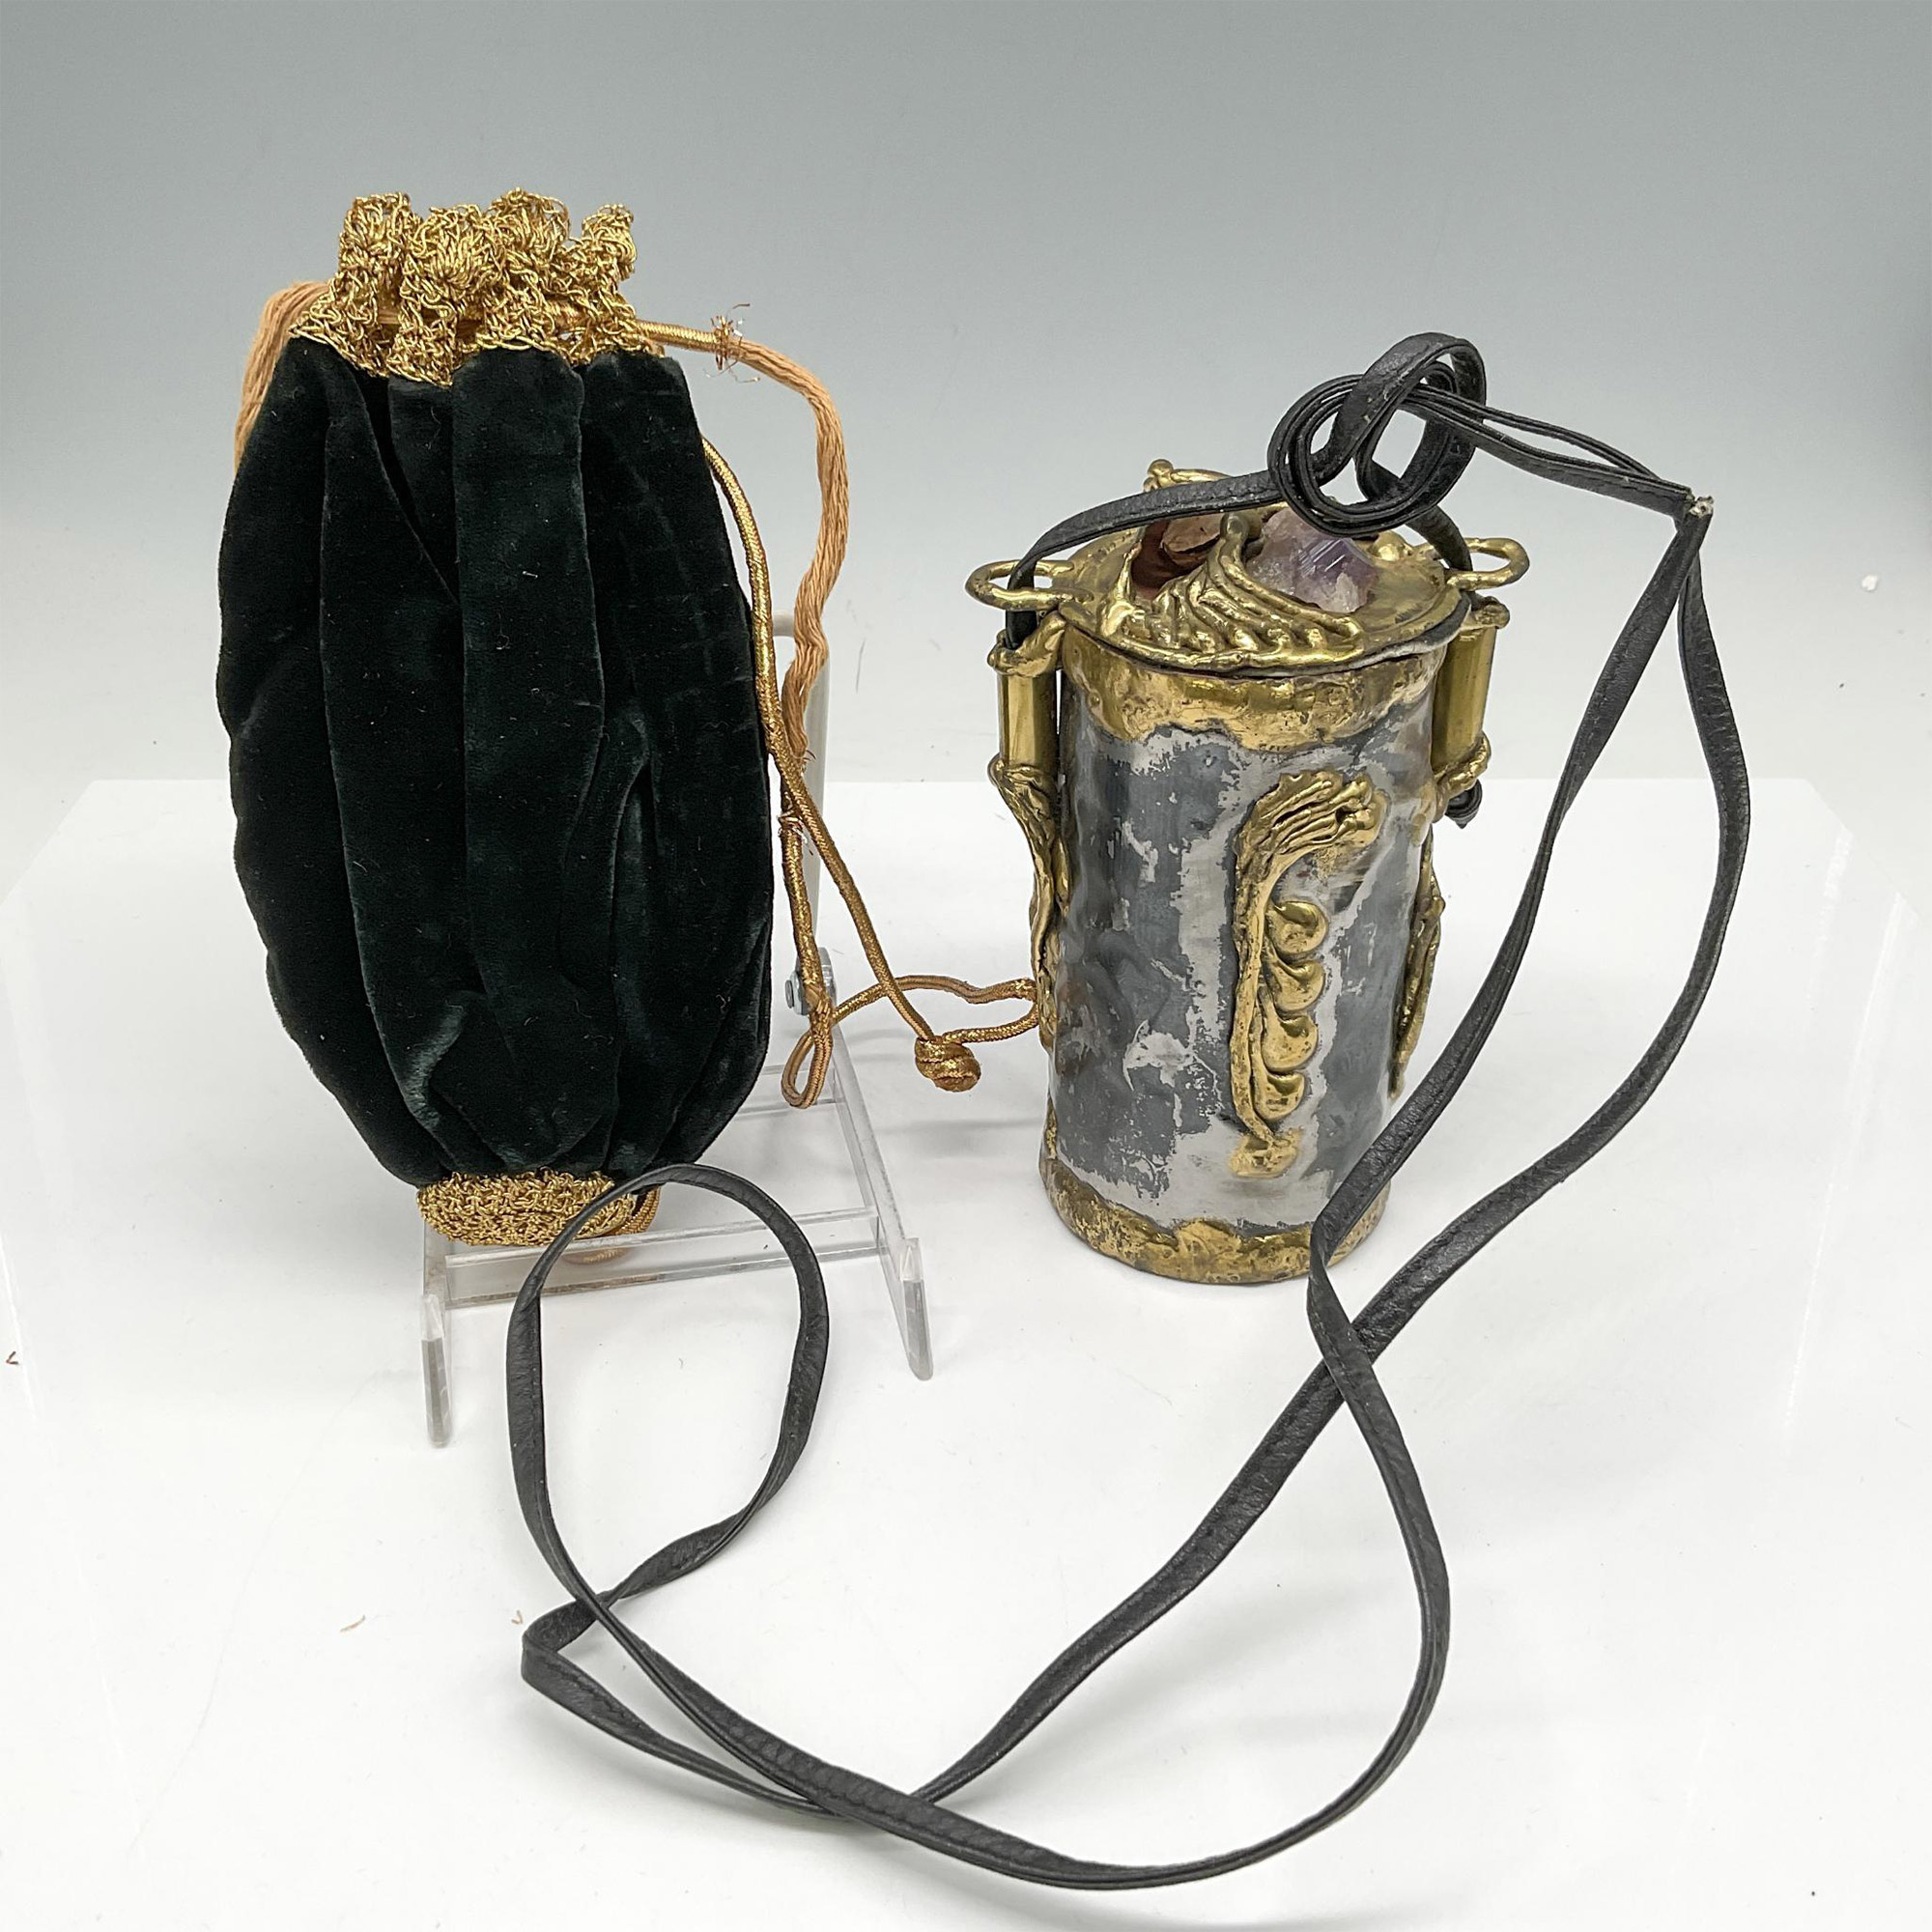 2pc Metal, Leather and Velvet Shoulder Bags - Image 2 of 3